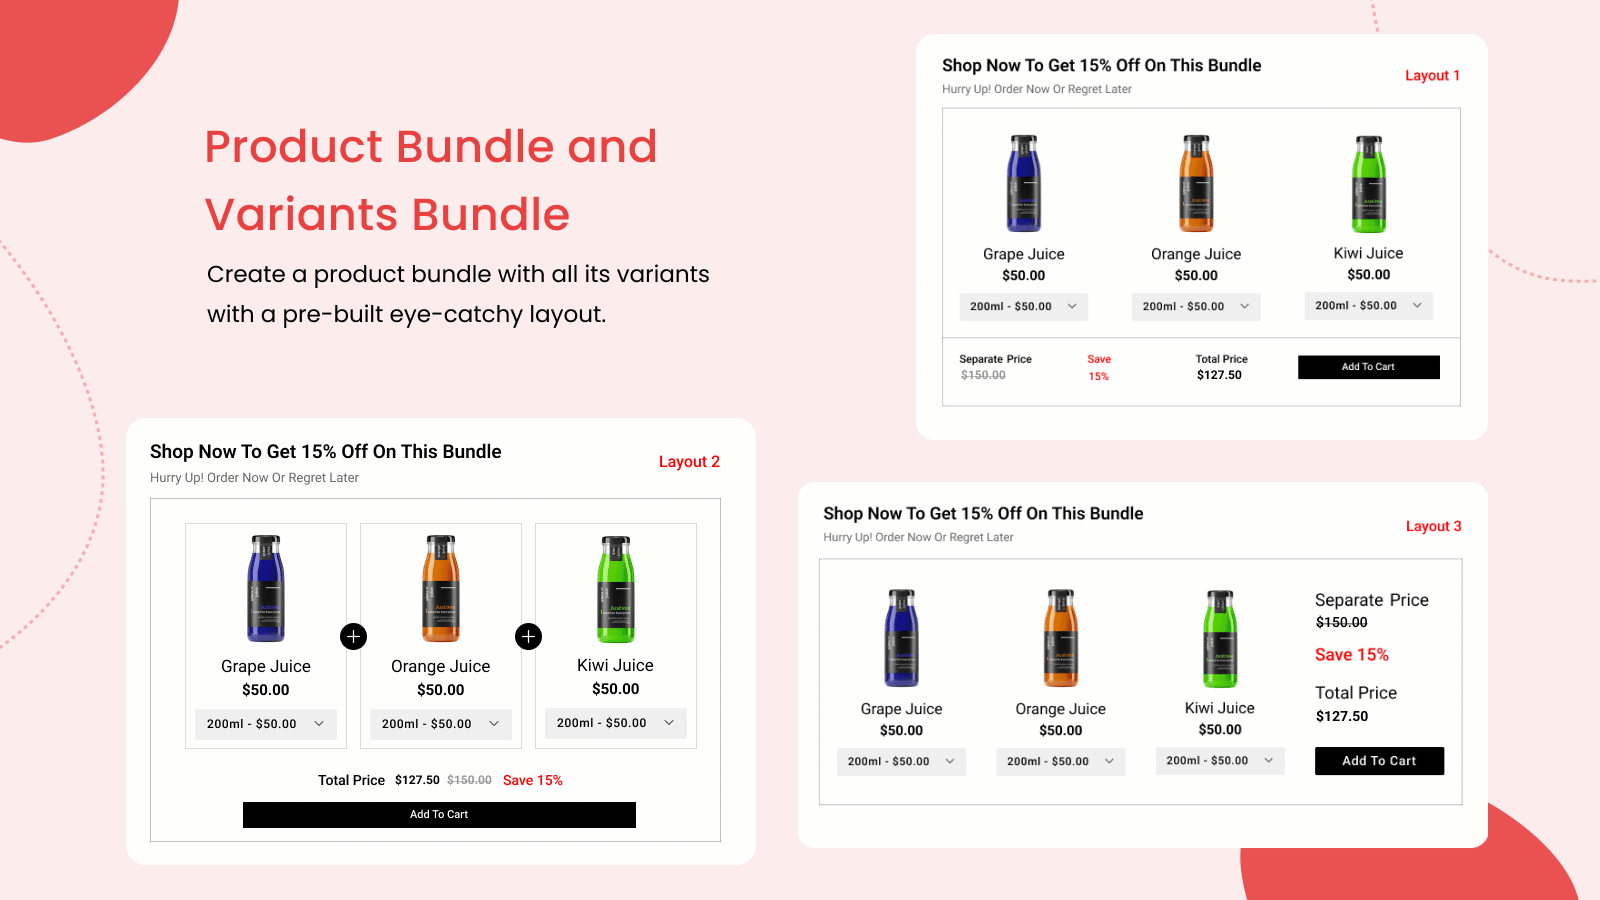 Bundle Products | Upsell